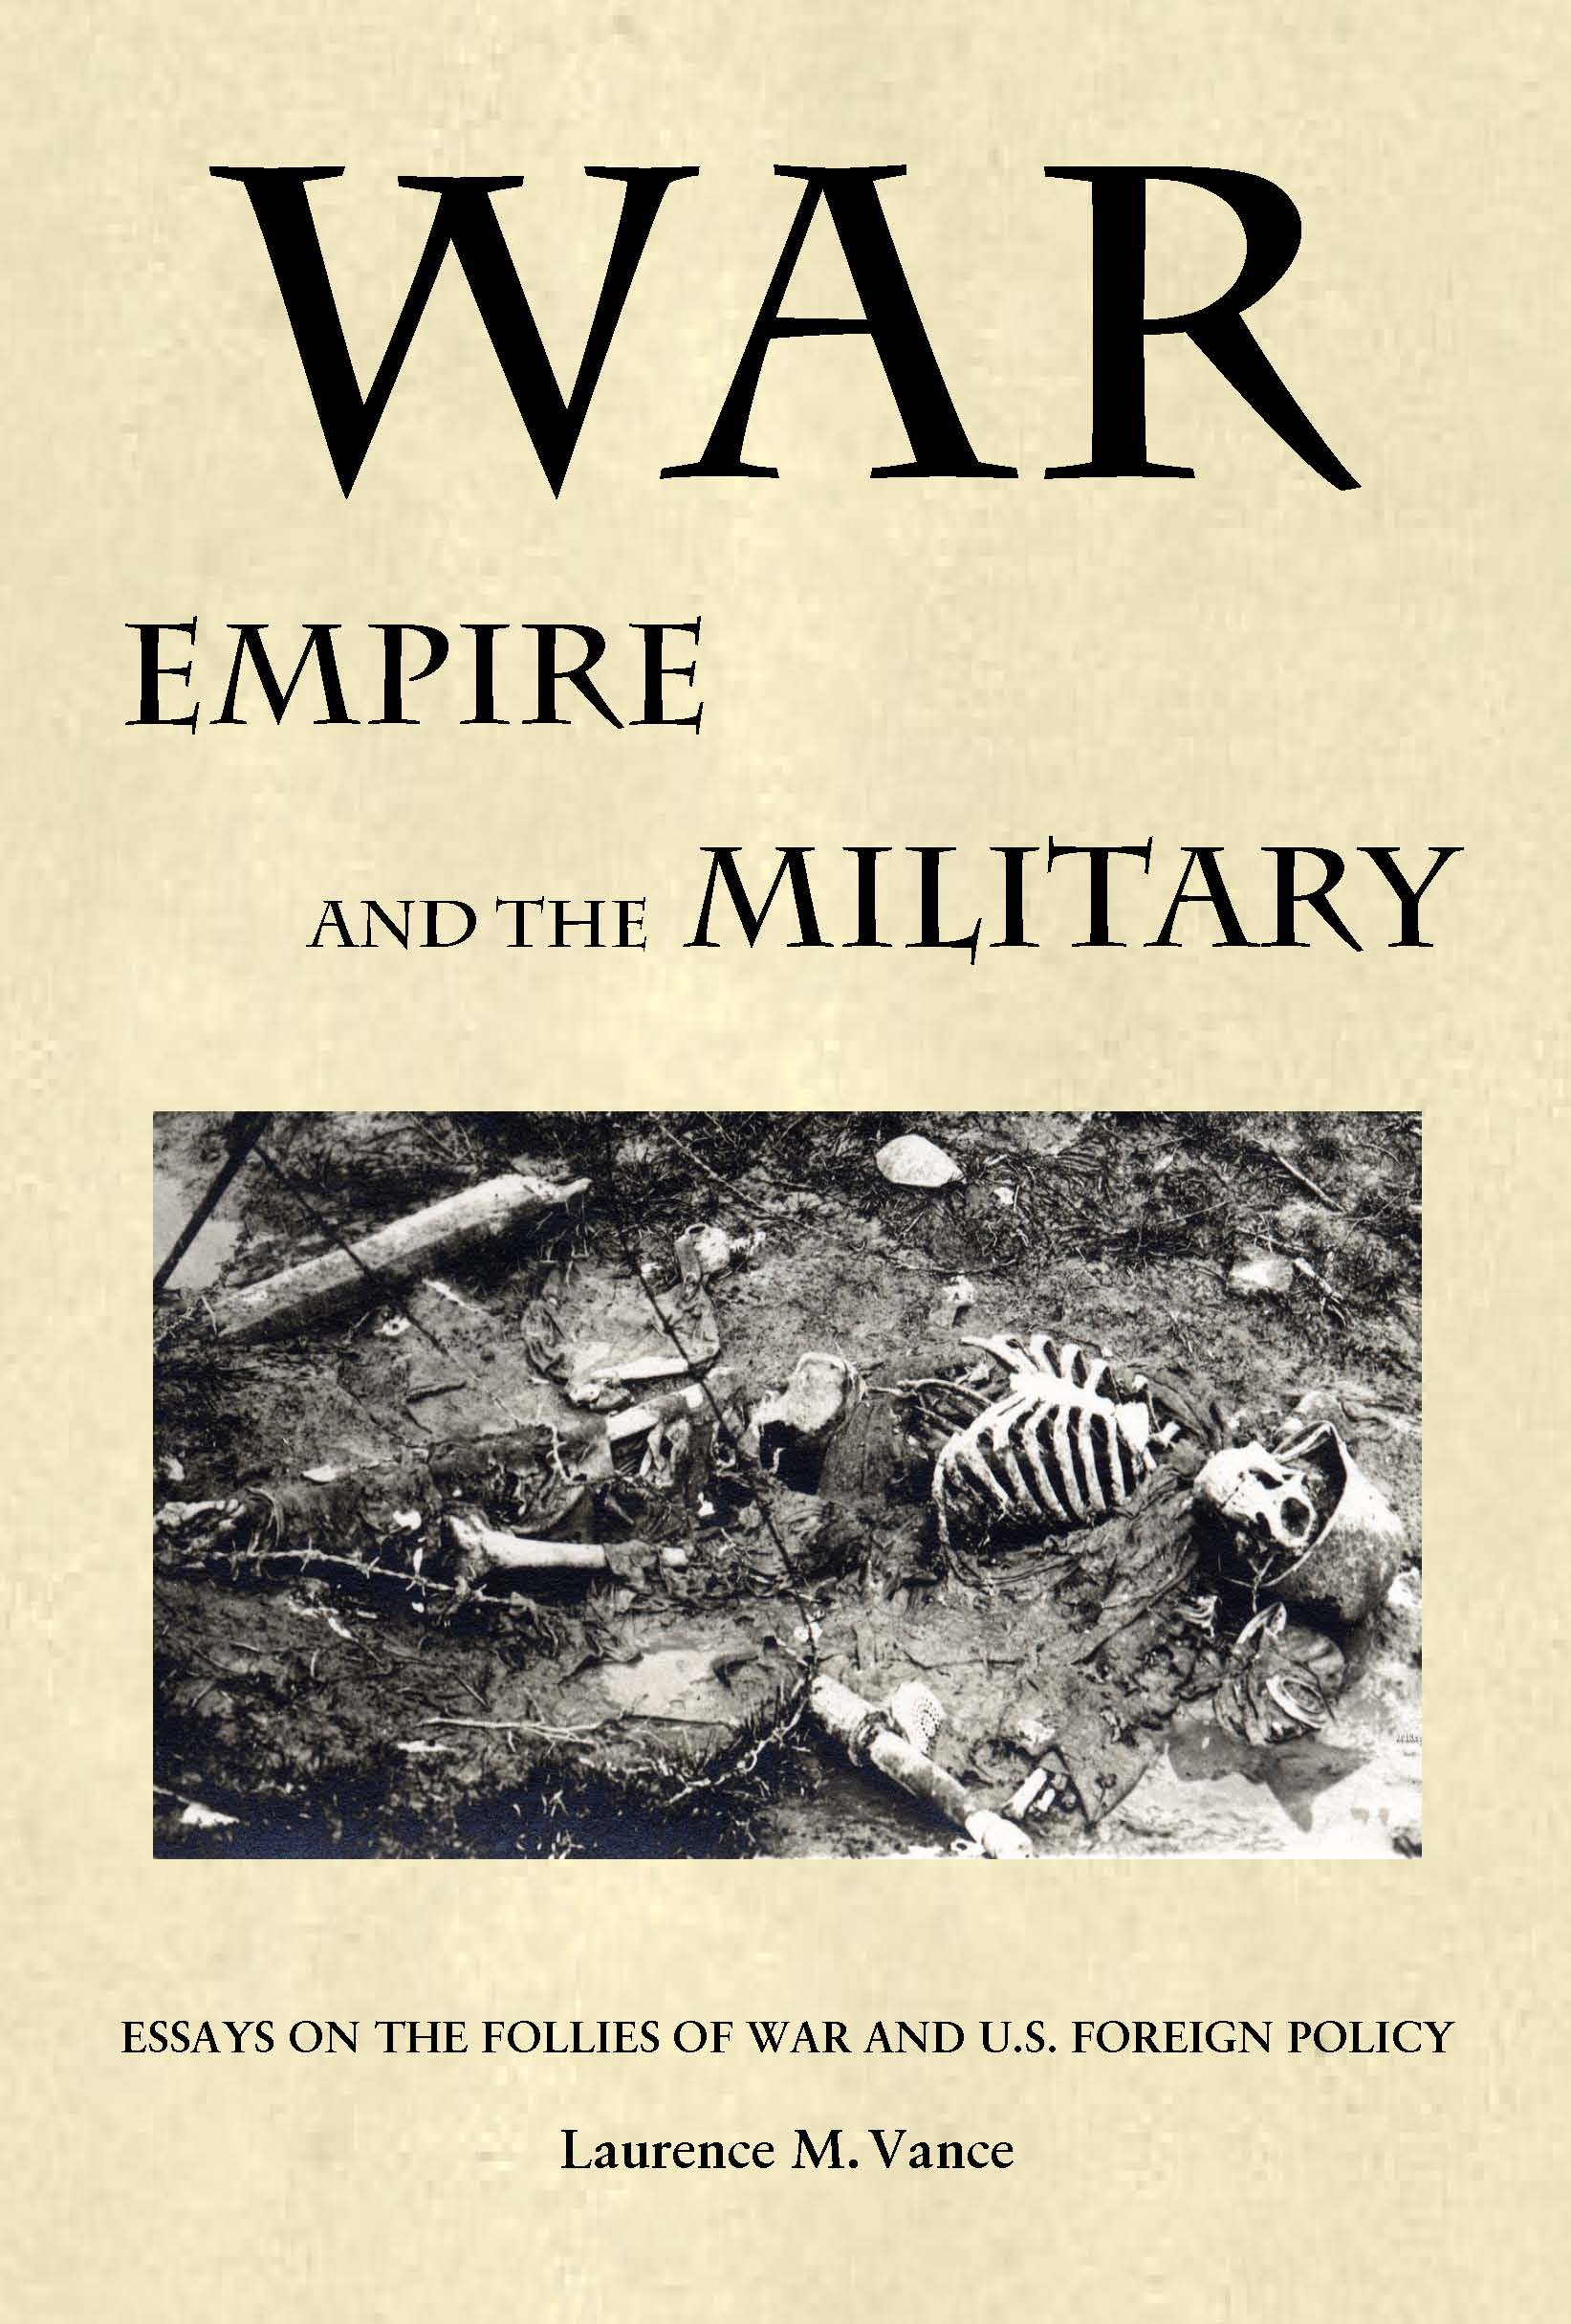 War, Empire, and the Military, 528 pages, paperback, $9.95